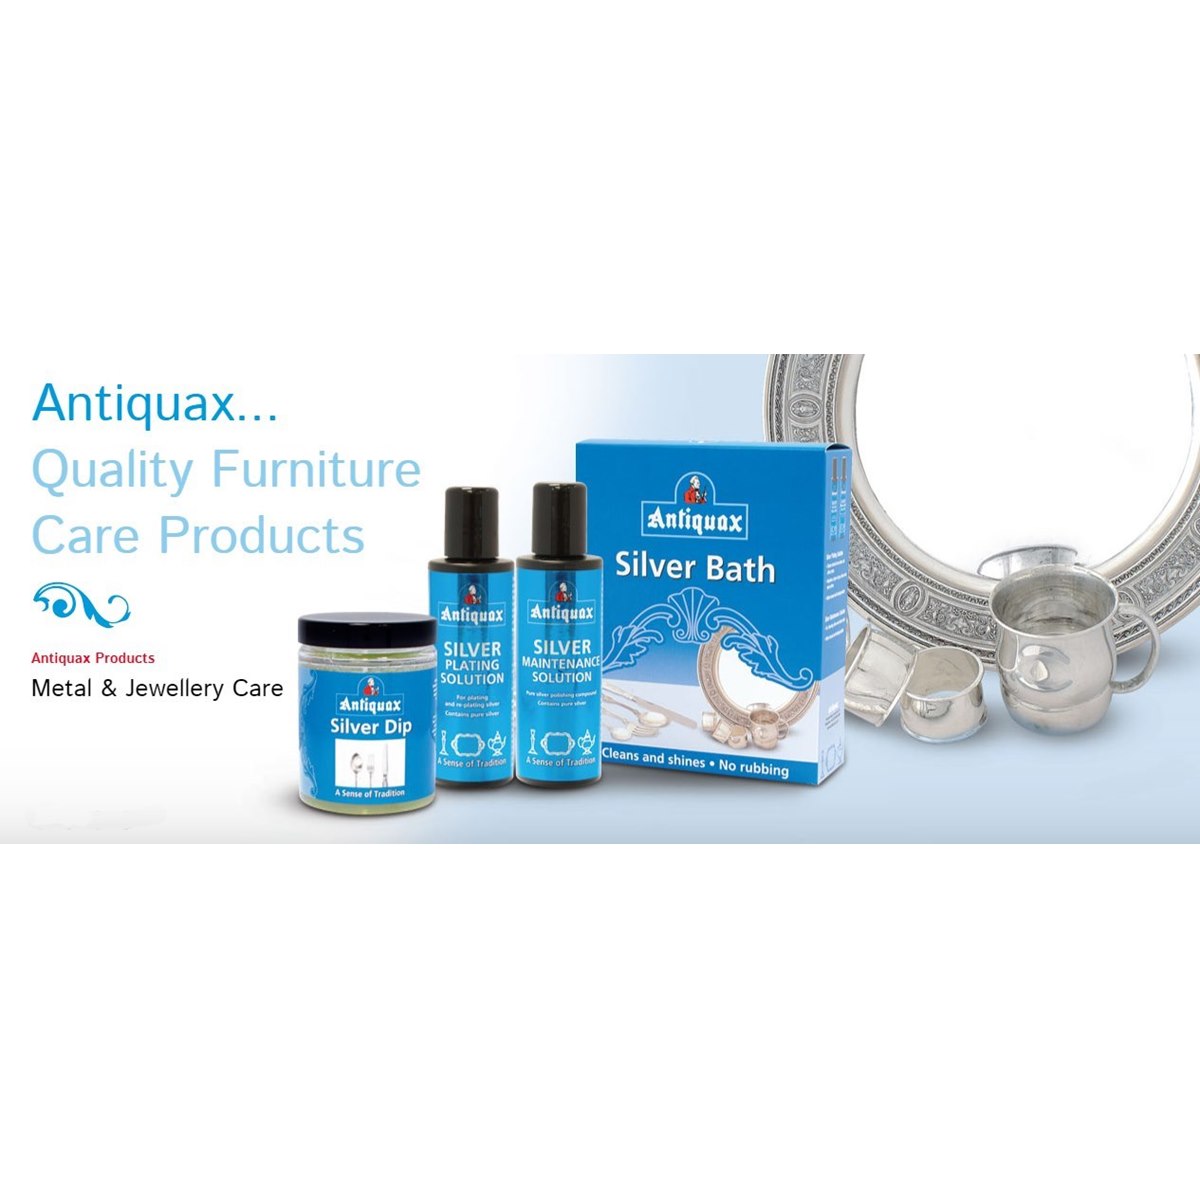 Where to Buy Antiquax Products Online